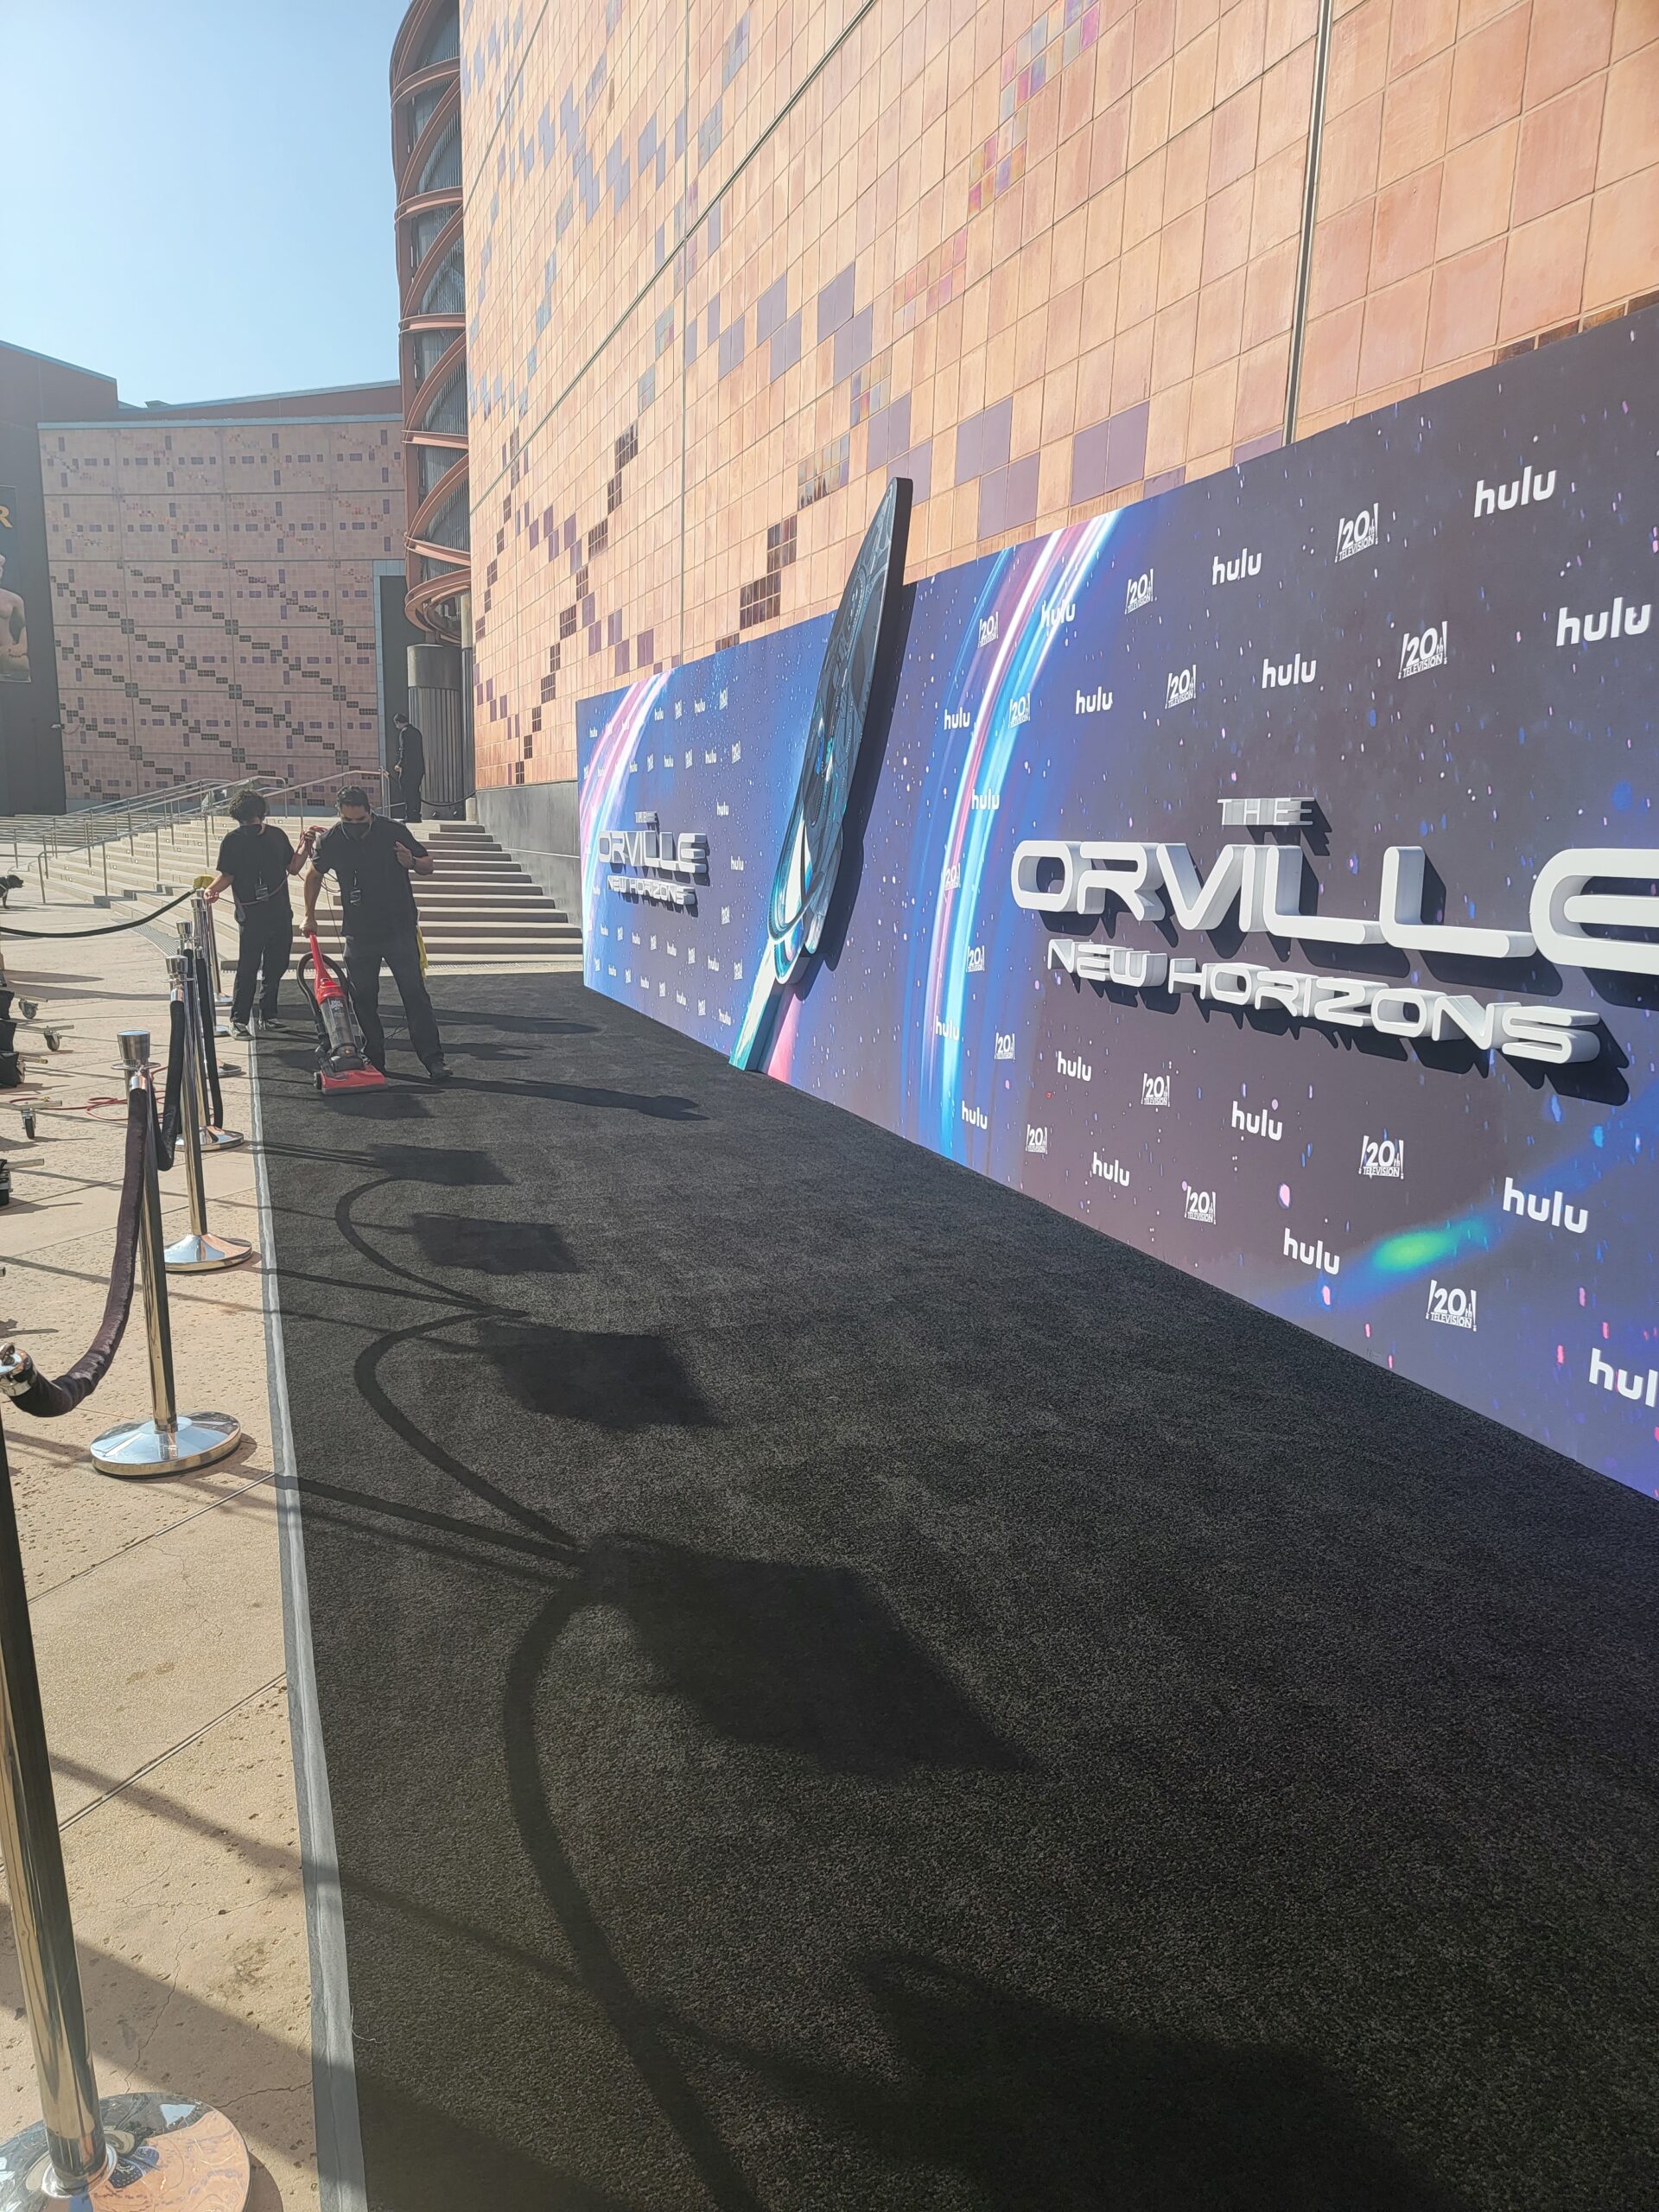 At ER Janitorial Services, our event cleaners are dedicated to ensuring that your event looks good and is presentable for your guests. In this image, our team is shown vacuuming the arrival carpets for a Hulu series premier of The Orville. 